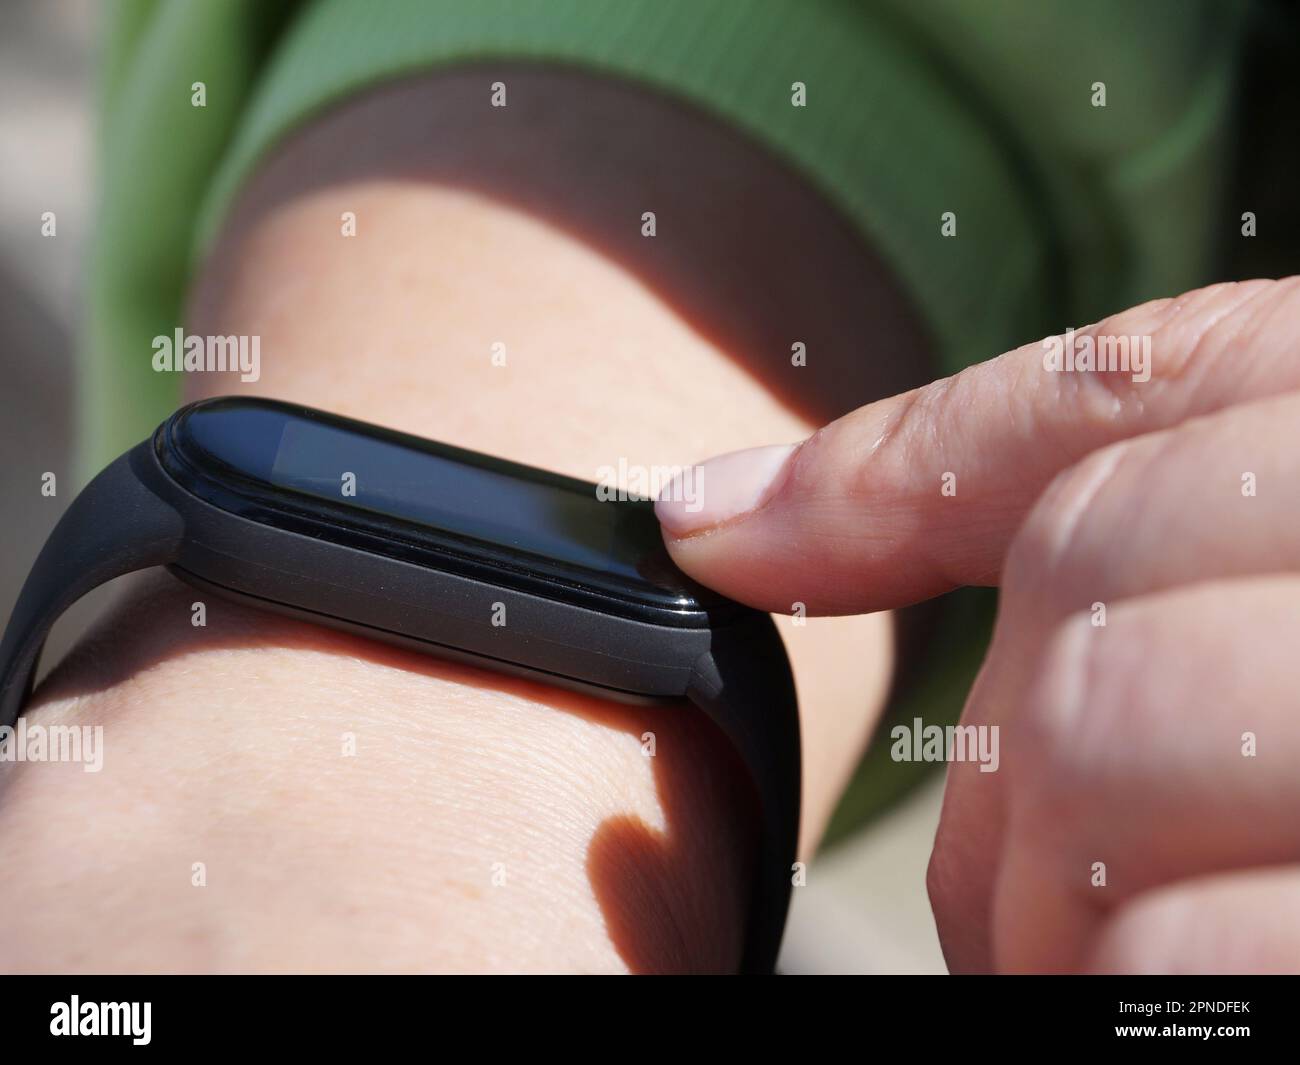 Using a fitness bracelet, a woman presses her finger on the display of a fitness bracelet close-up Stock Photo